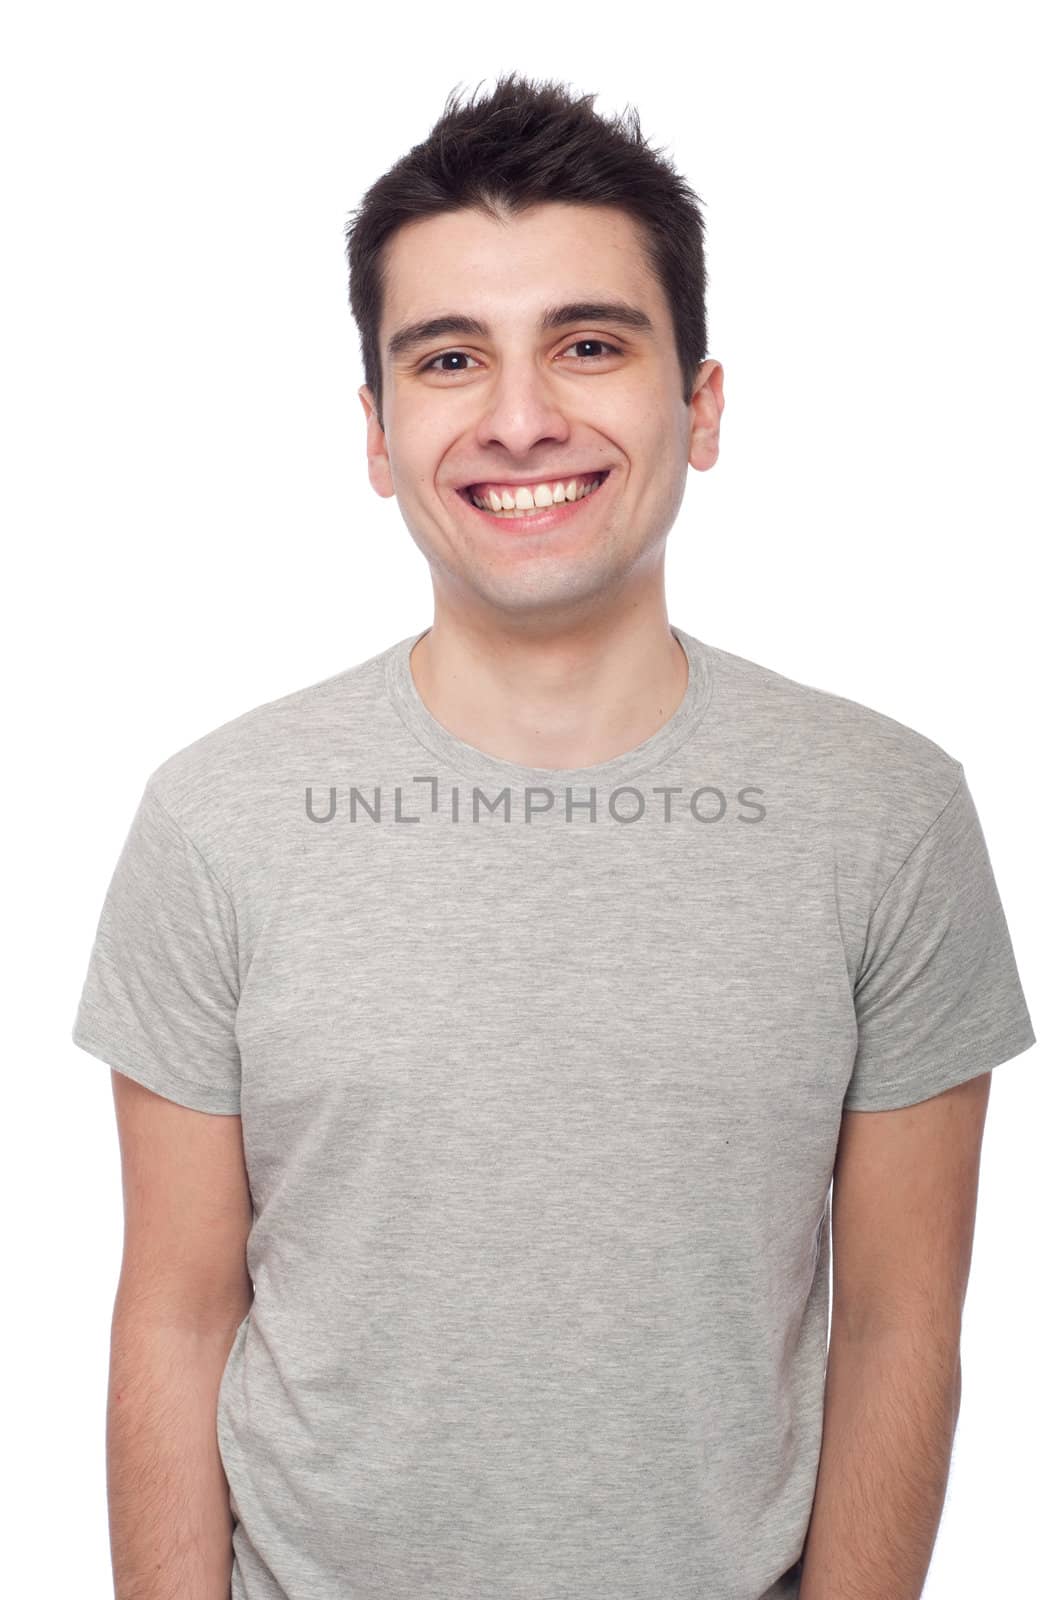 young casual man portrait isolated on white background 